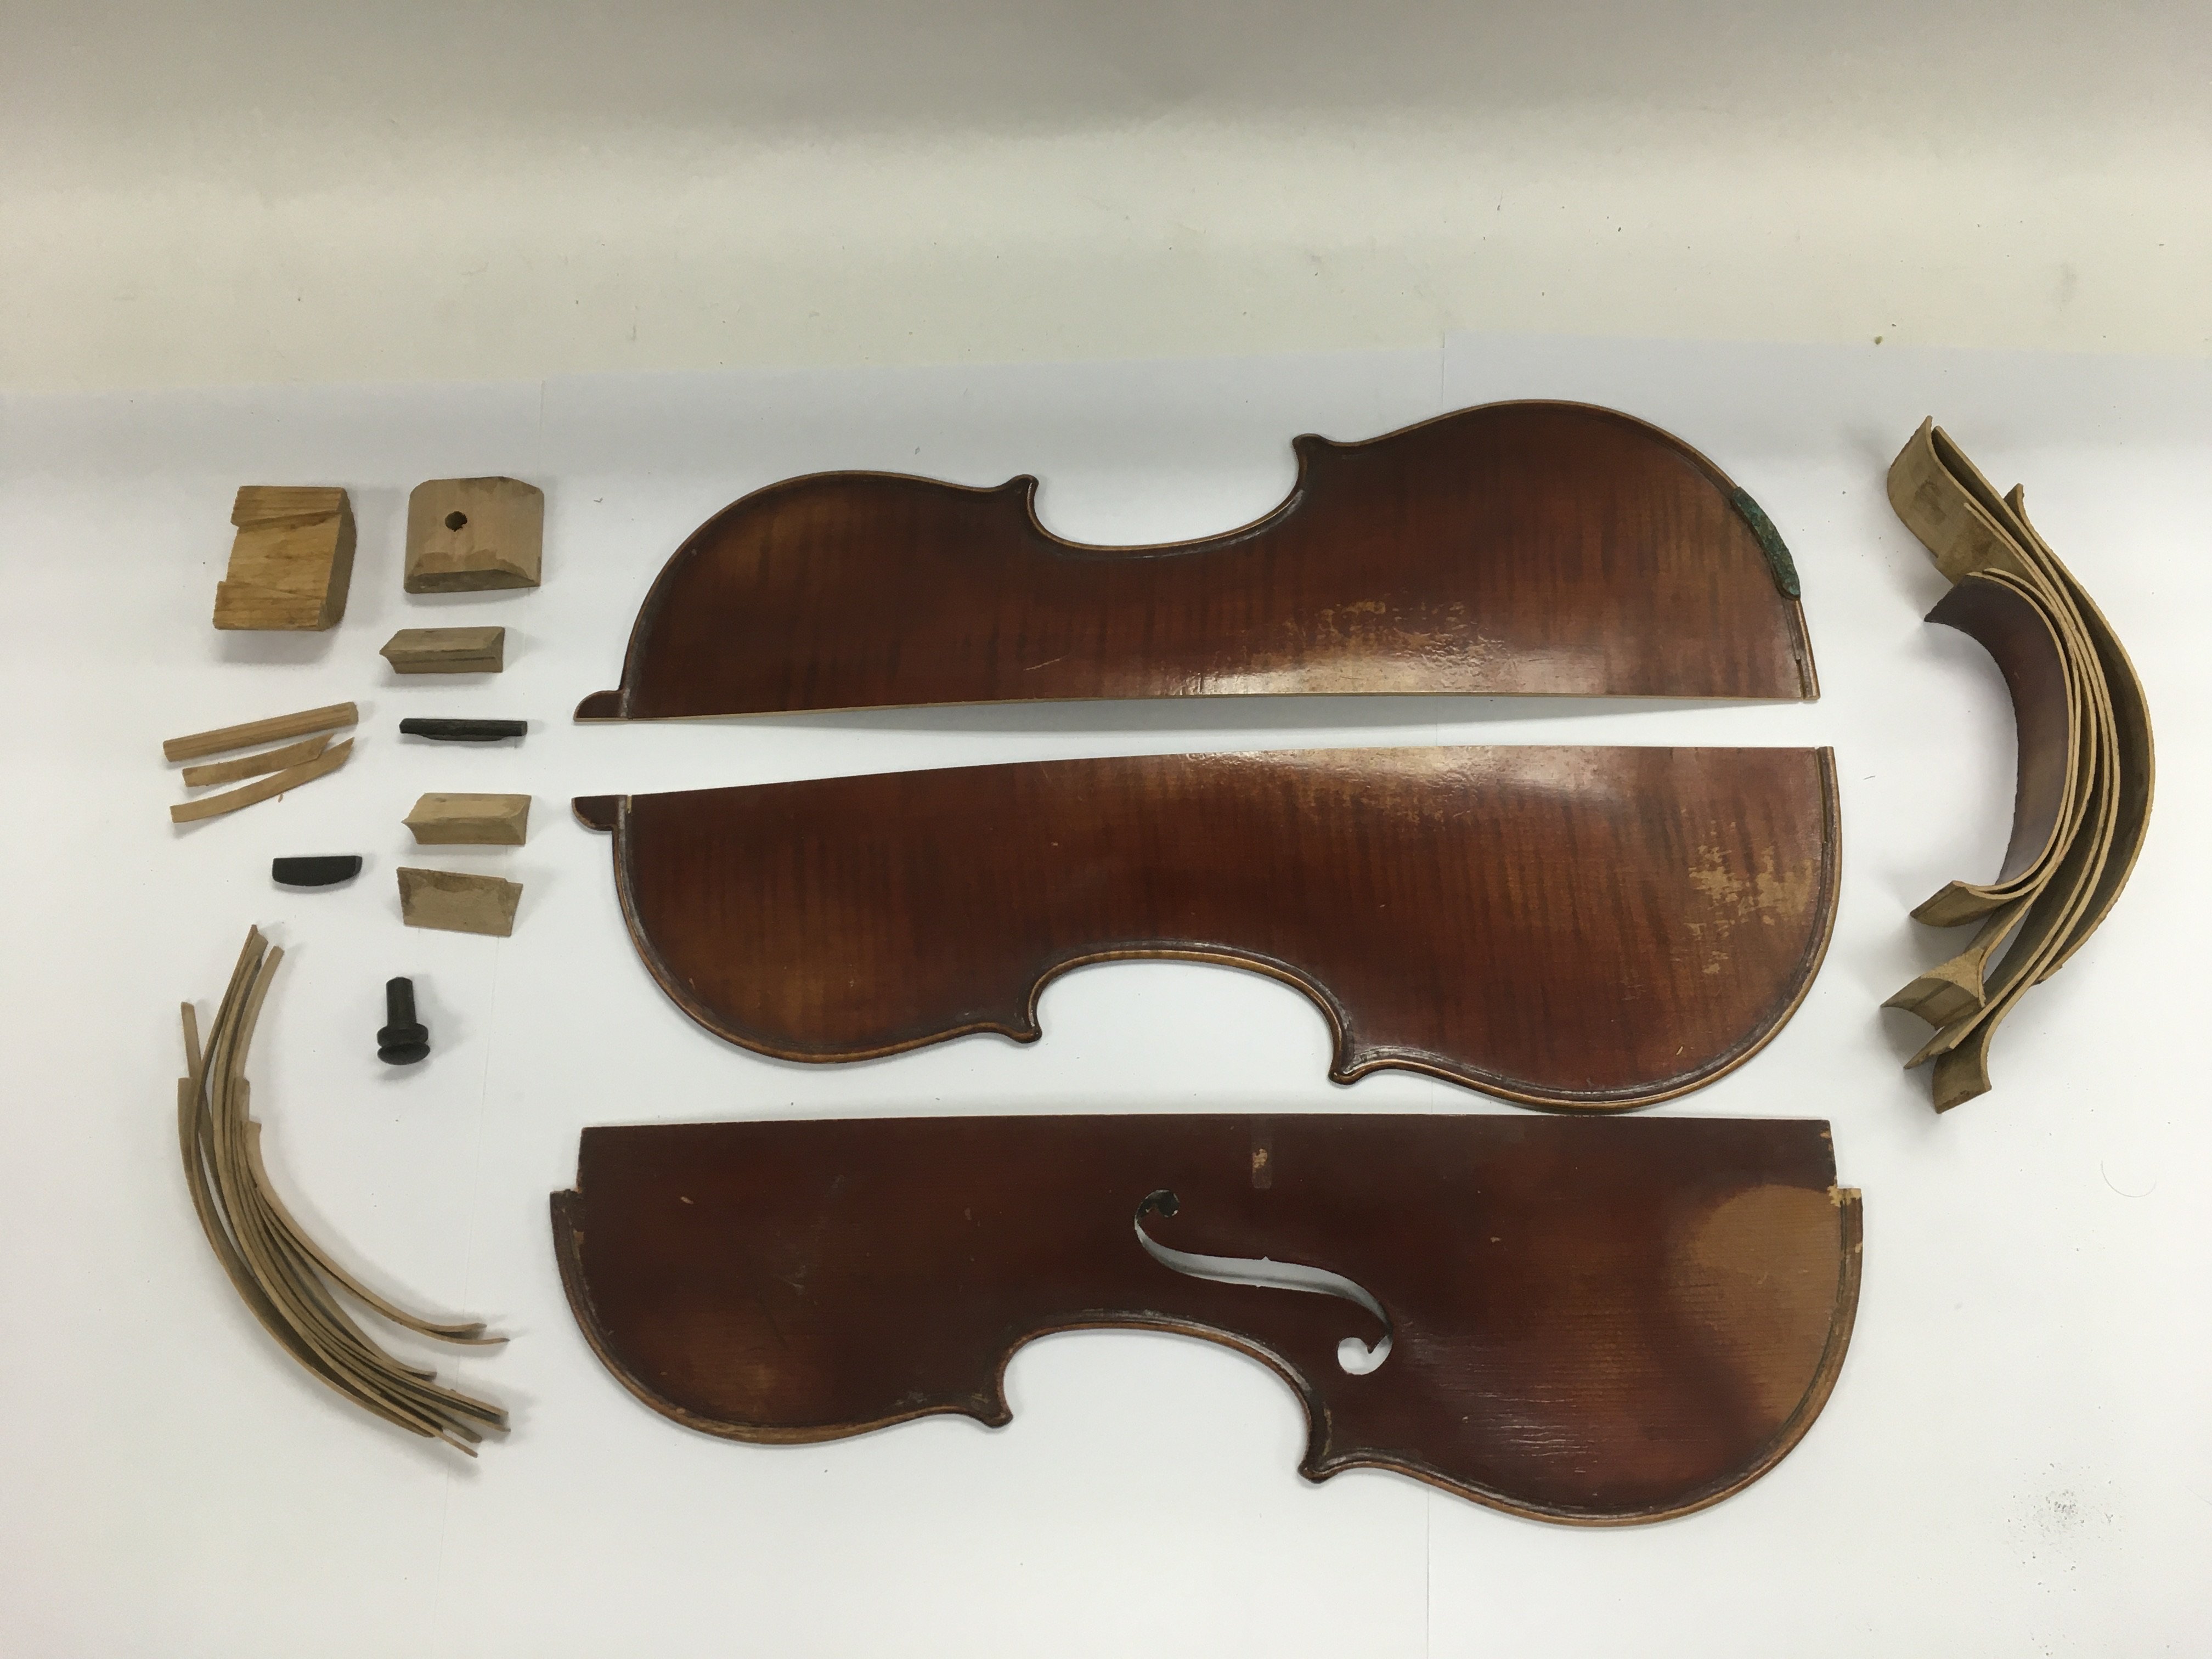 Restoration project. An Italian violin labelled Paolo Giacomelli, 1928.